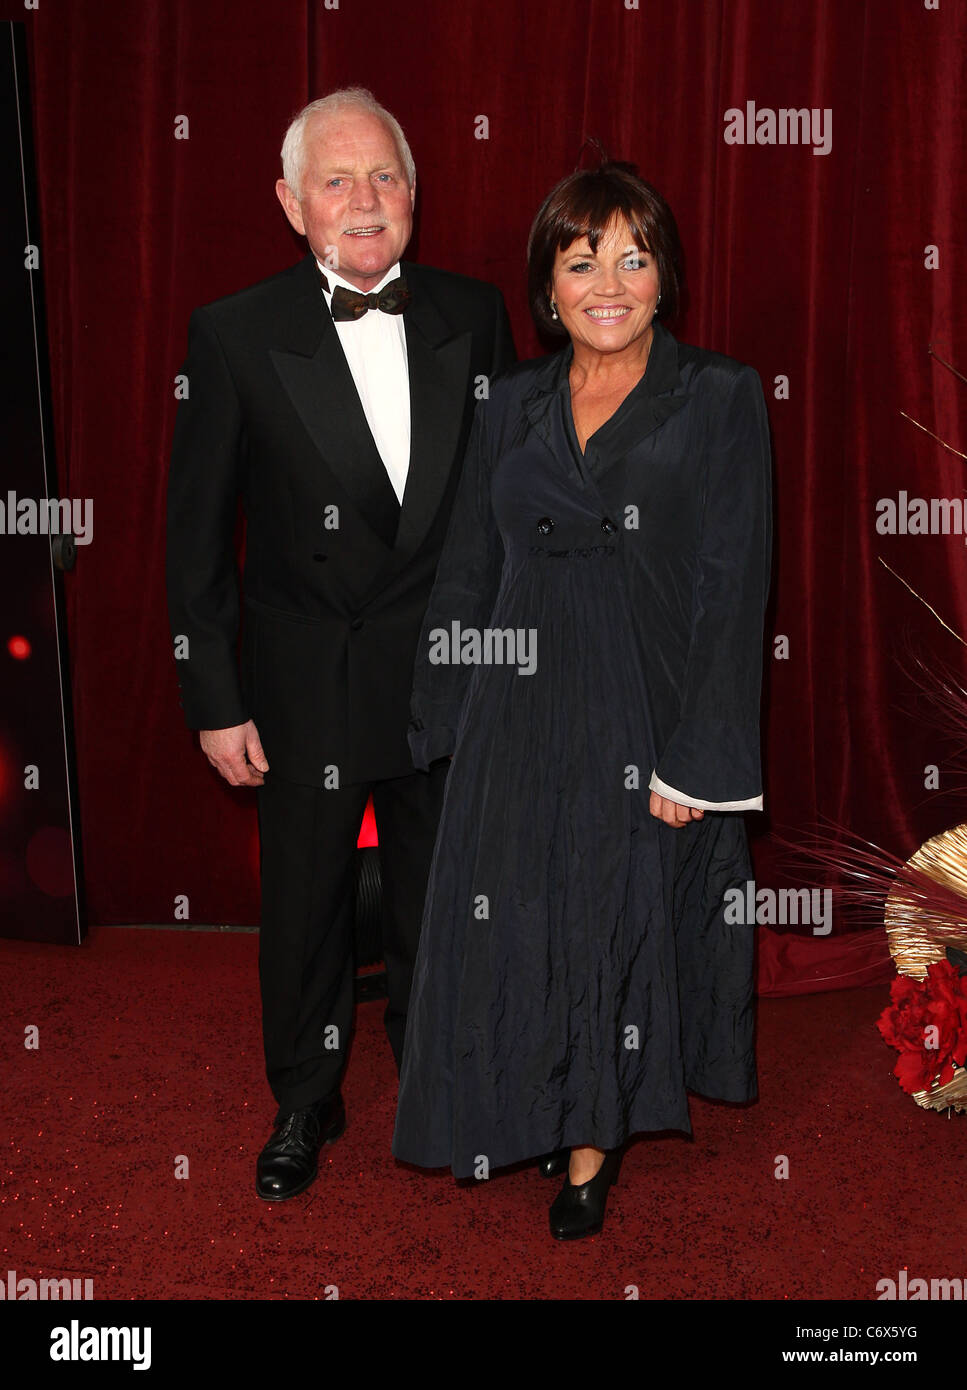 Christopher Chittell and Lesley Dunlop 2010 British Soap Awards held at the London Television Centre - Arrivals London, England Stock Photo